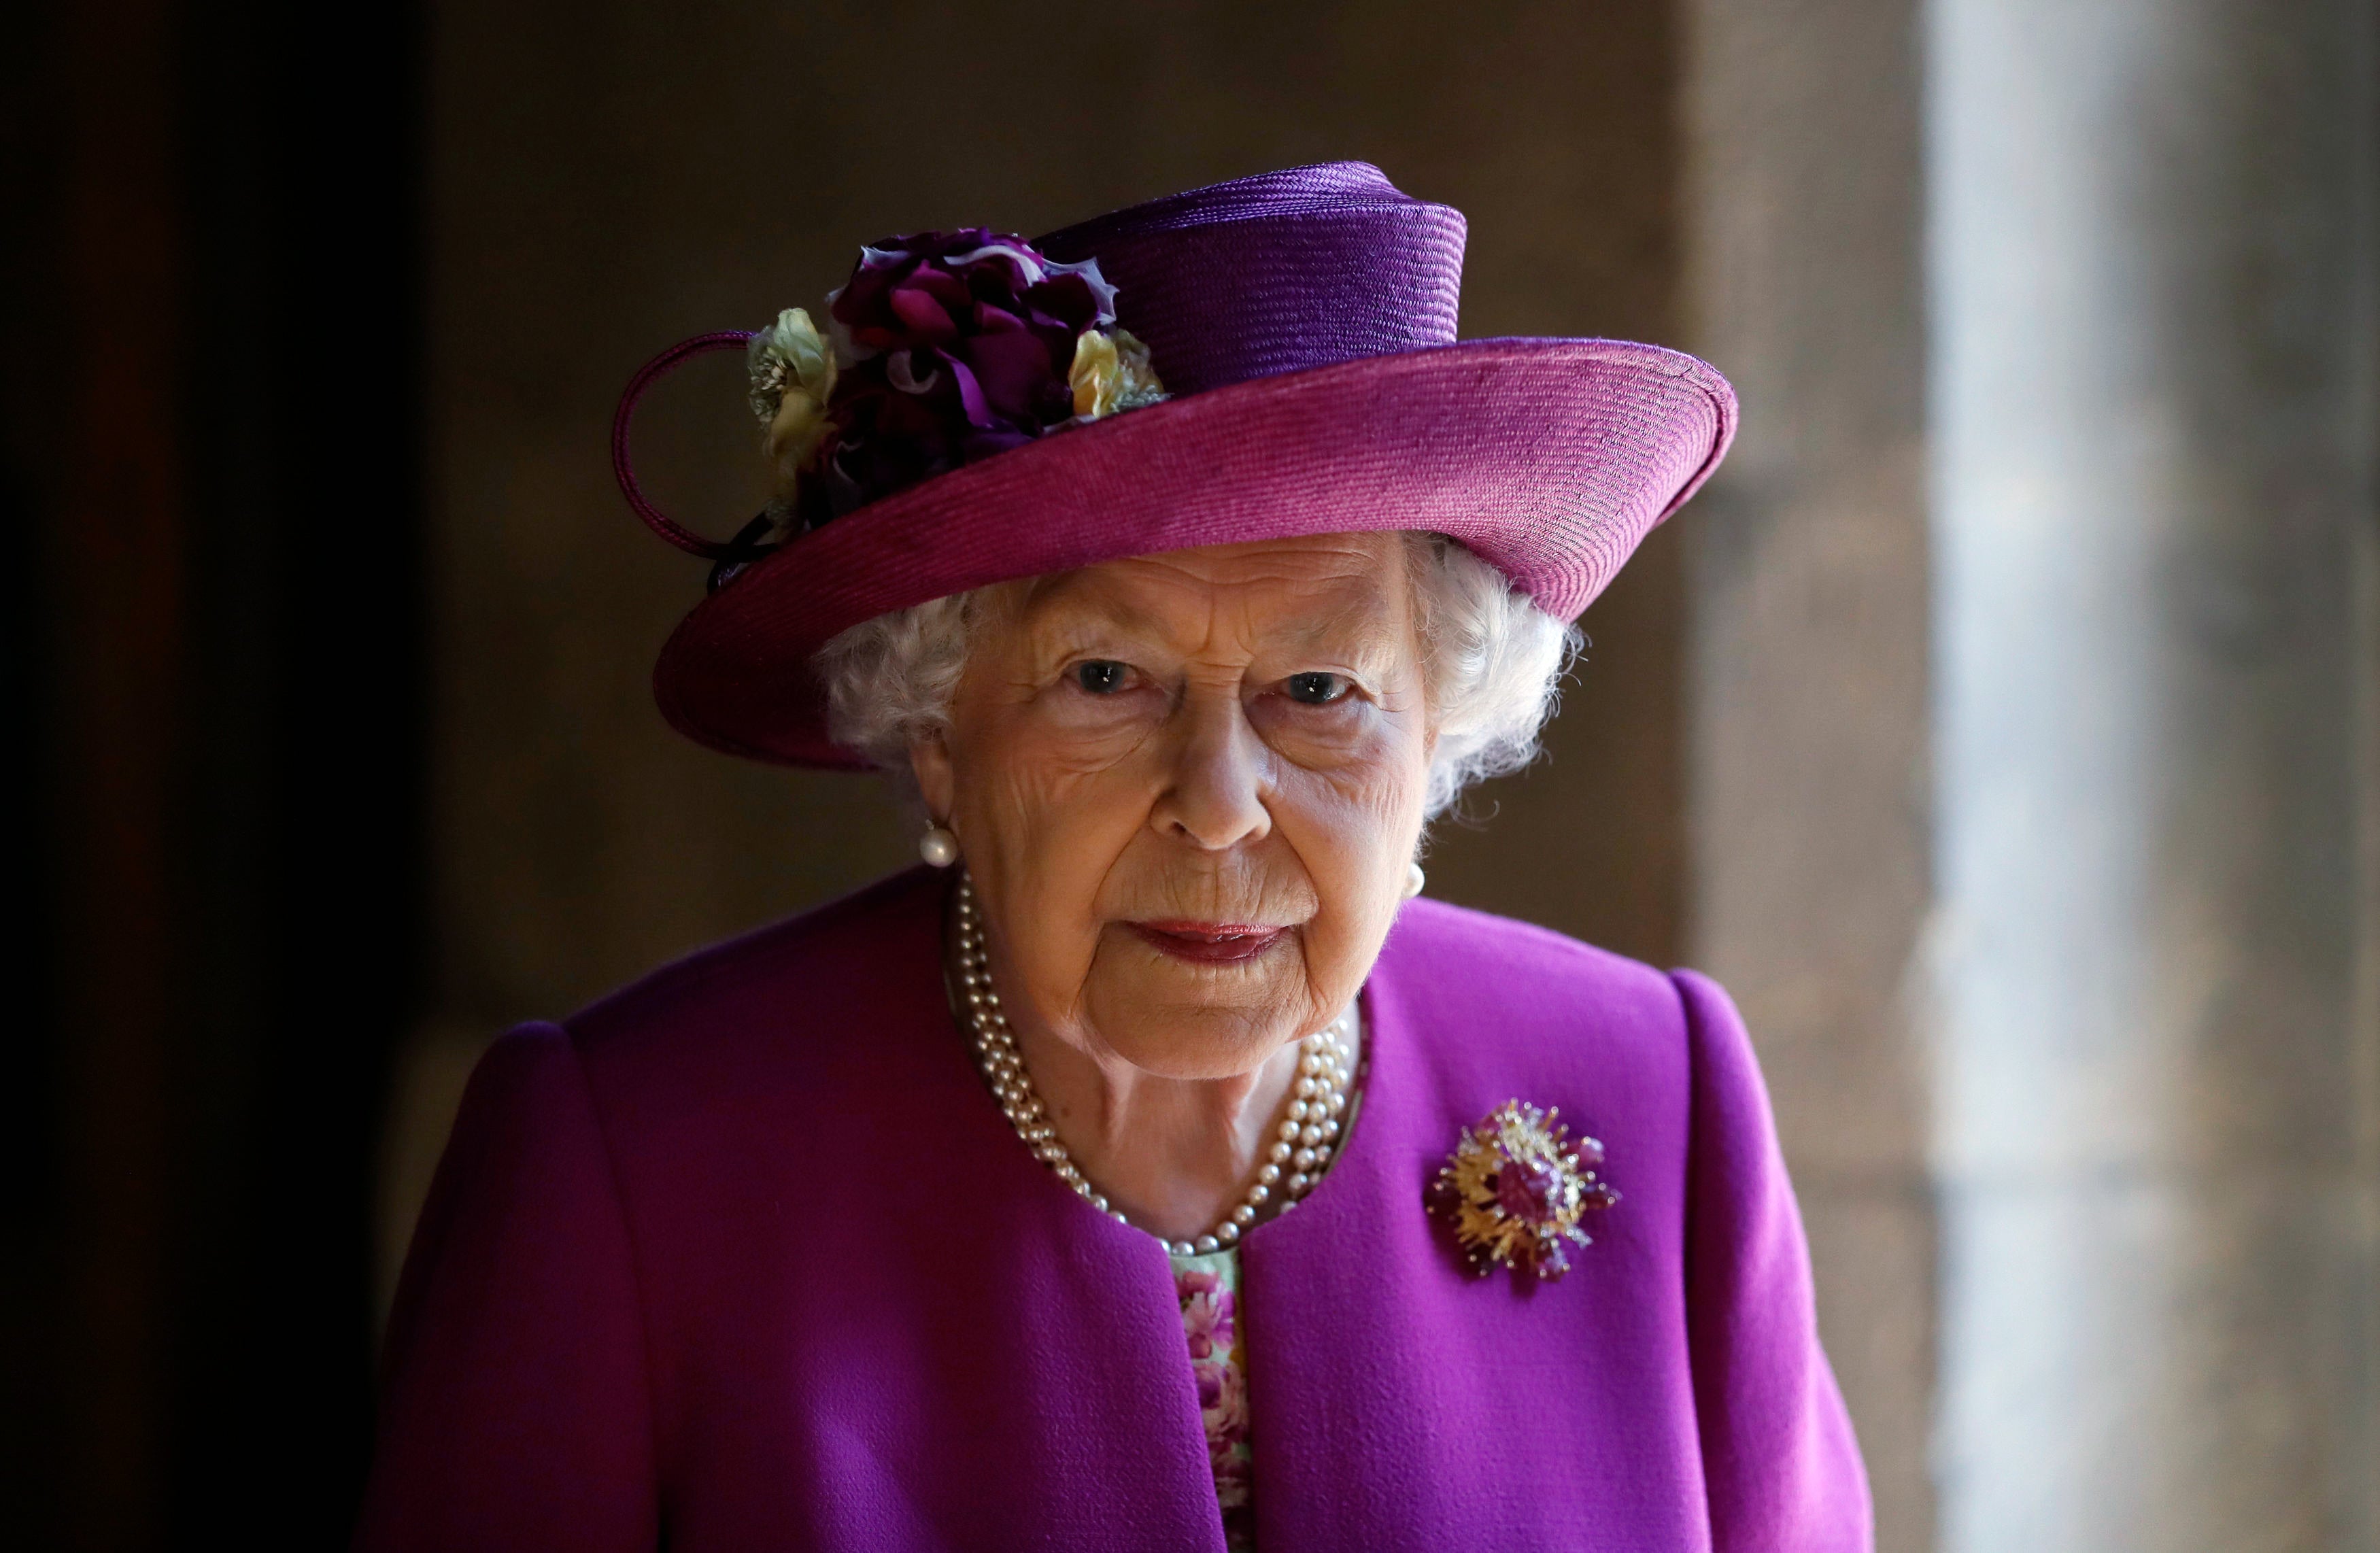 The Queen spent a night in hospital earlier this week before returning to Windsor on Thursday